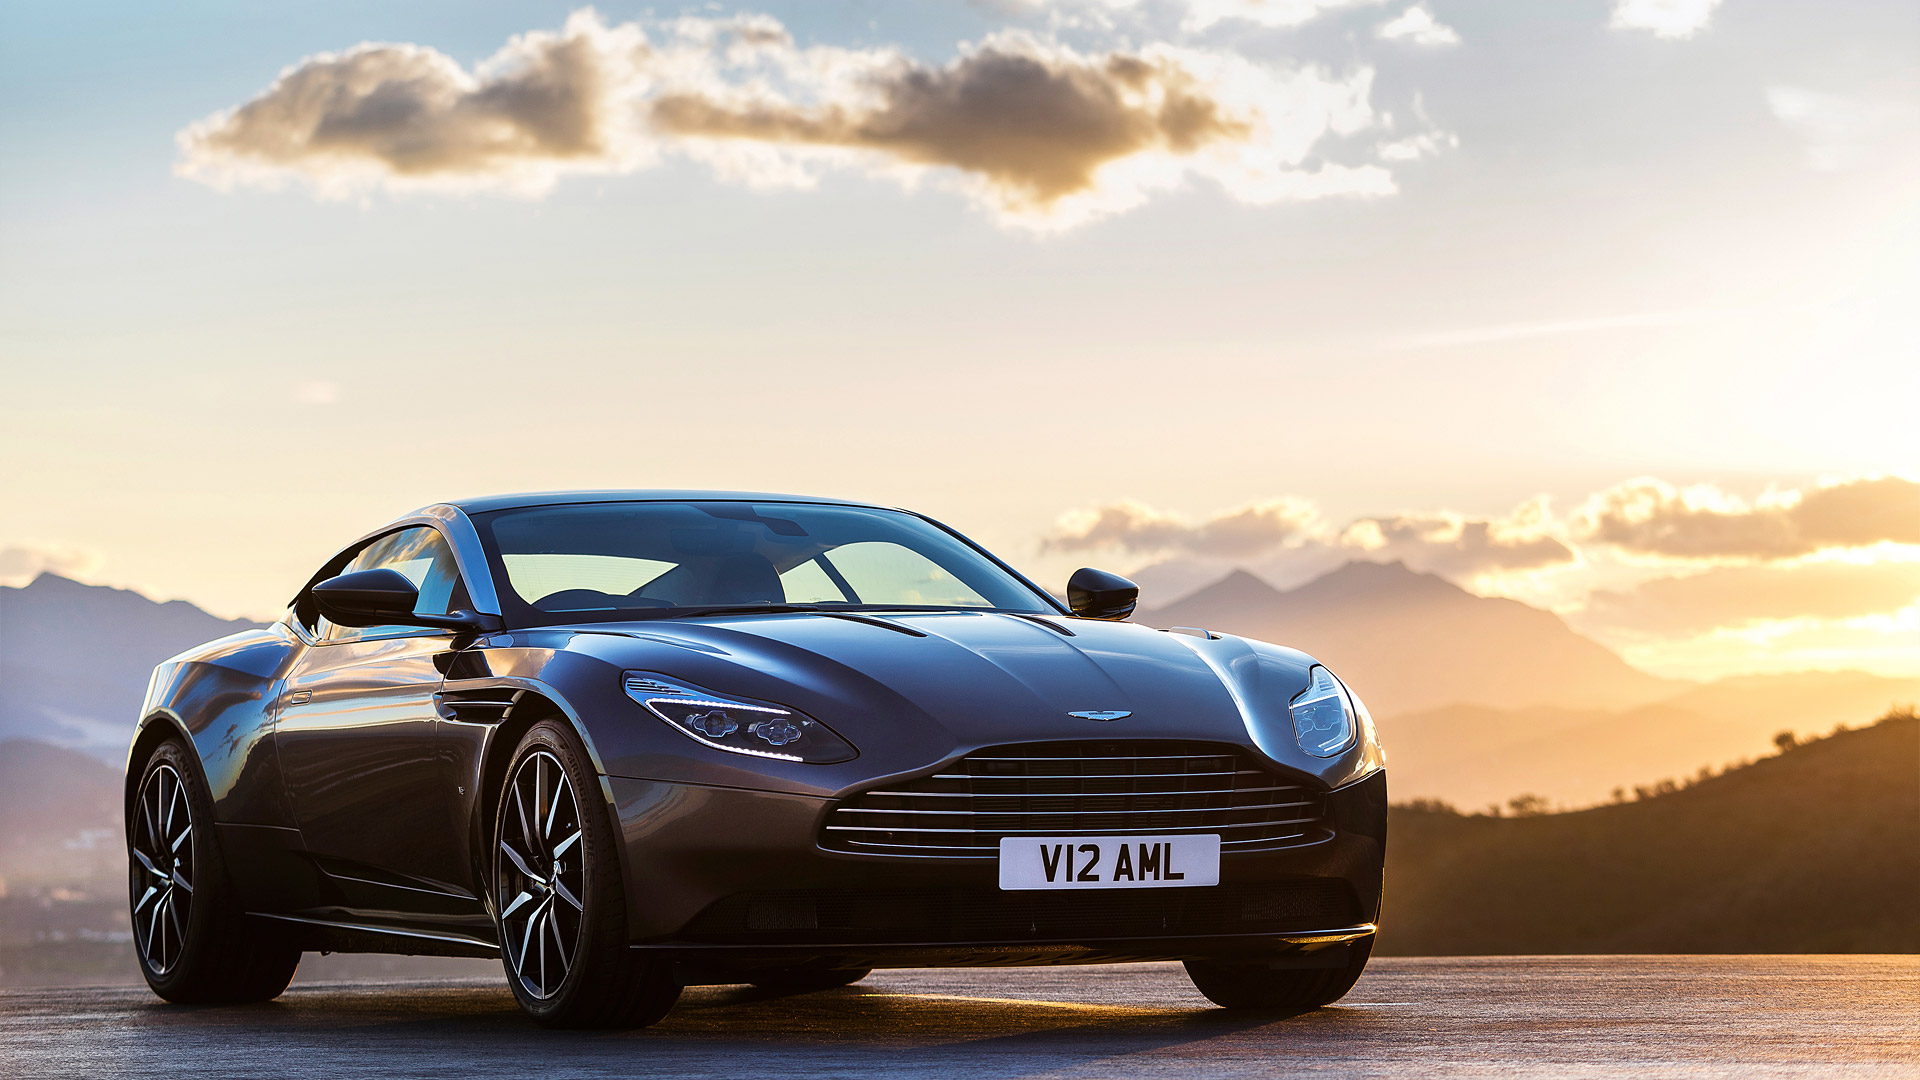 Free Download 2017 Aston Martin Db11 Wallpapers Hd Images Wsupercars 1920x1080 For Your Desktop Mobile Tablet Explore 29 Aston Martin Db11 Wallpapers Aston Martin Db11 Wallpapers Aston Martin Wallpapers